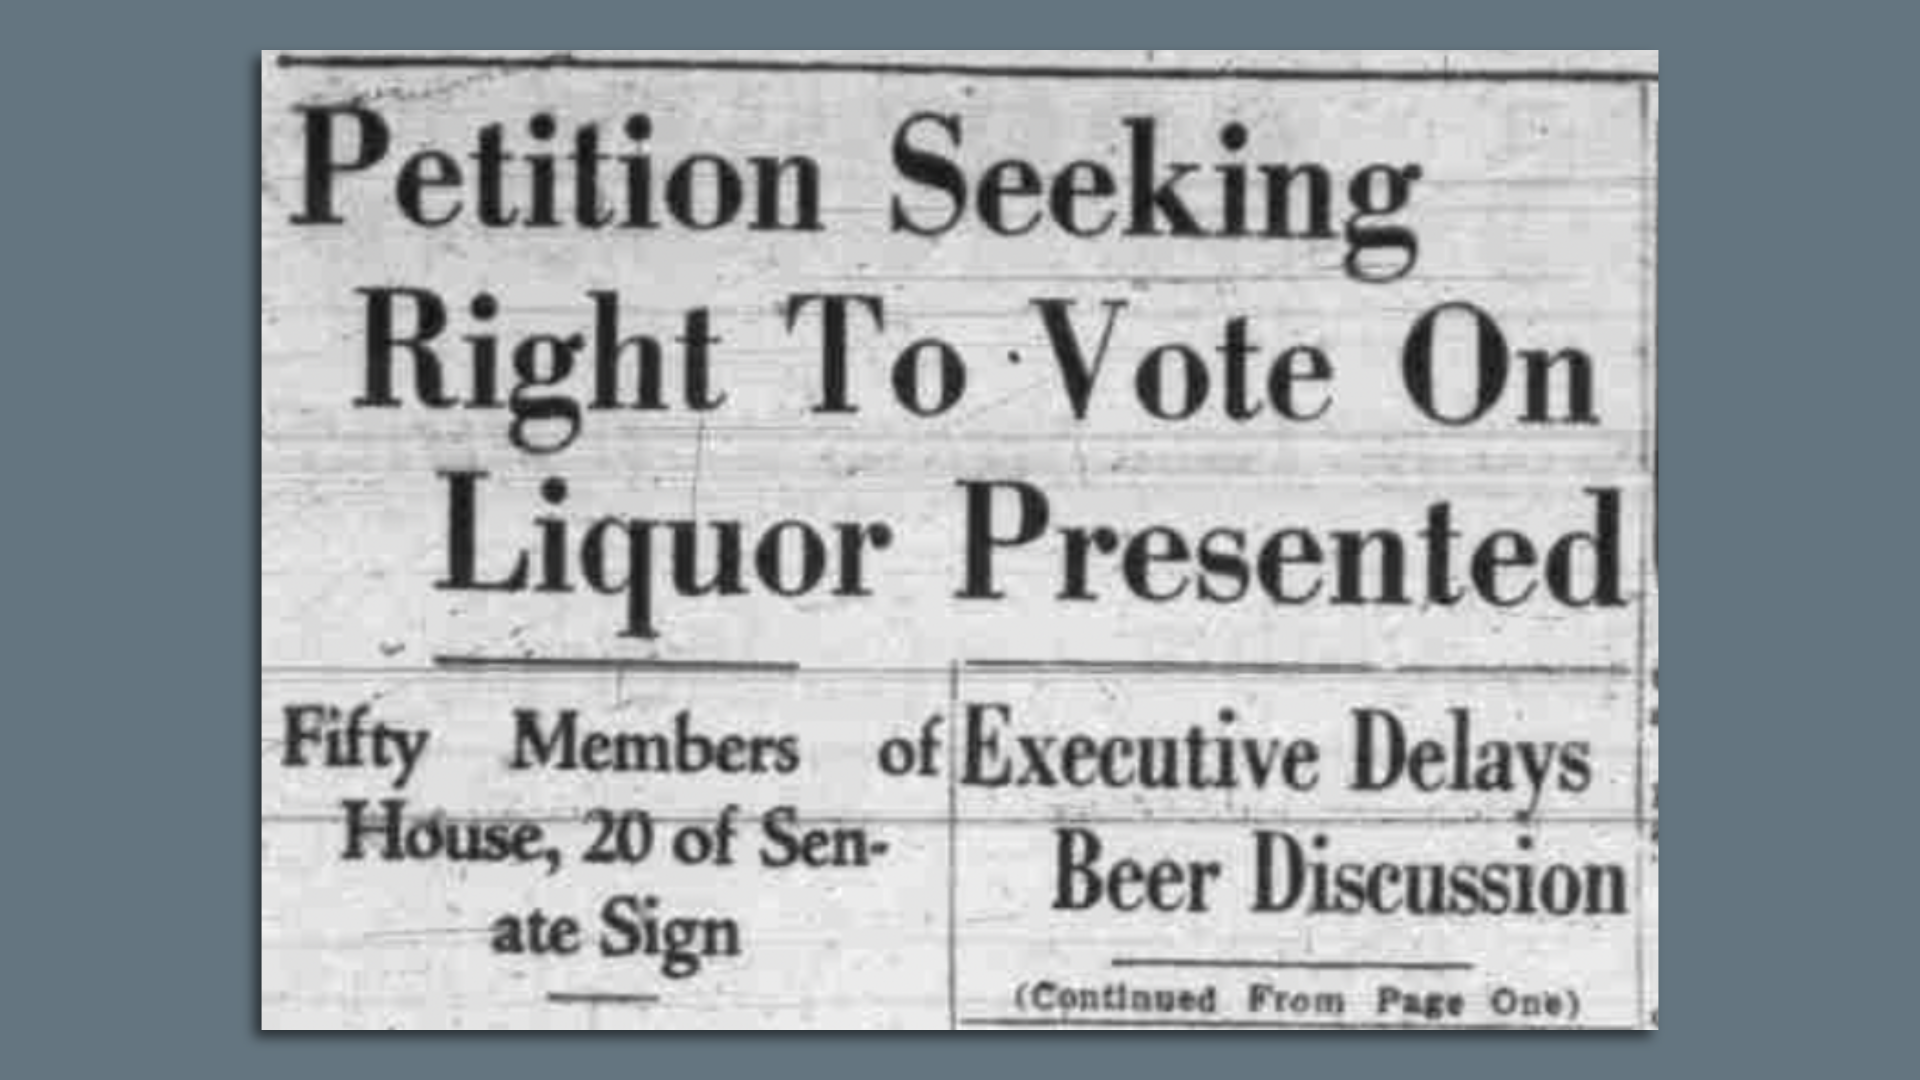 Headline reads "Petition seeking right to vote on liquor presented."